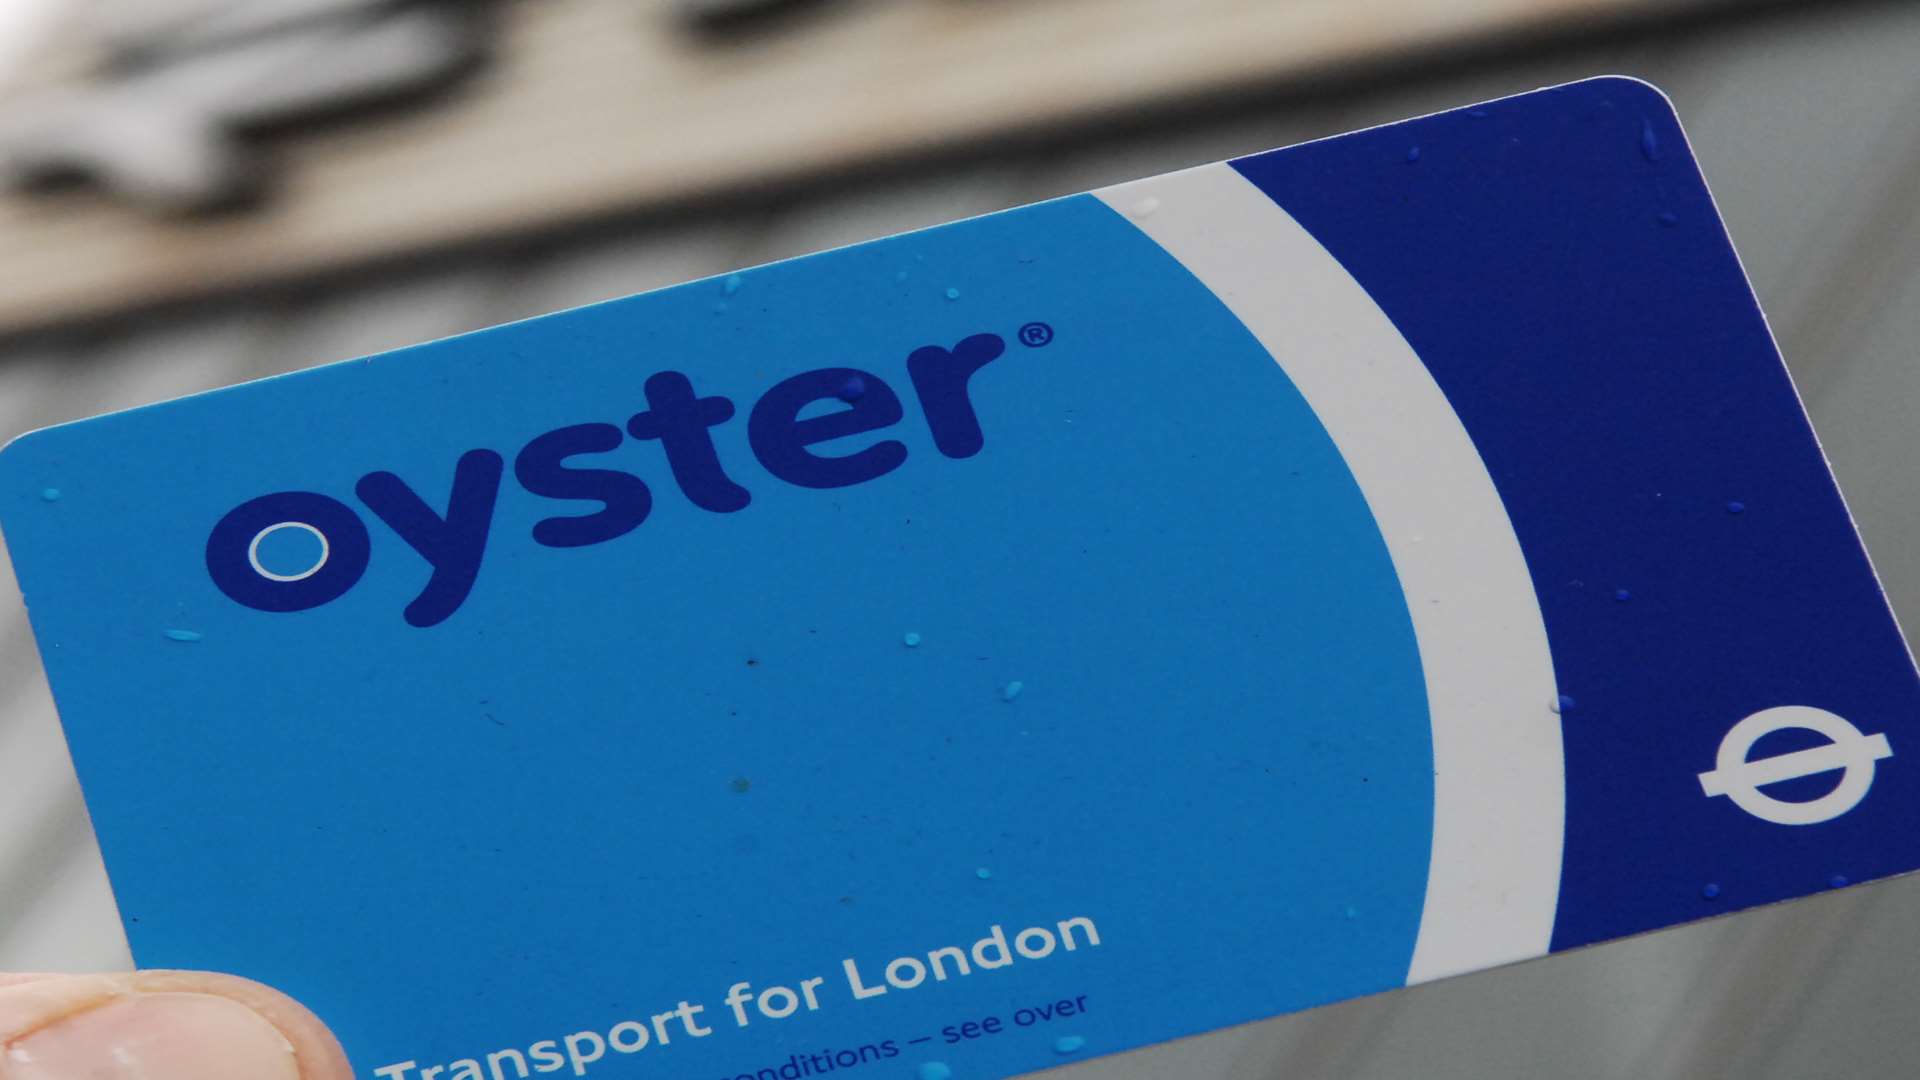 The Oyster card